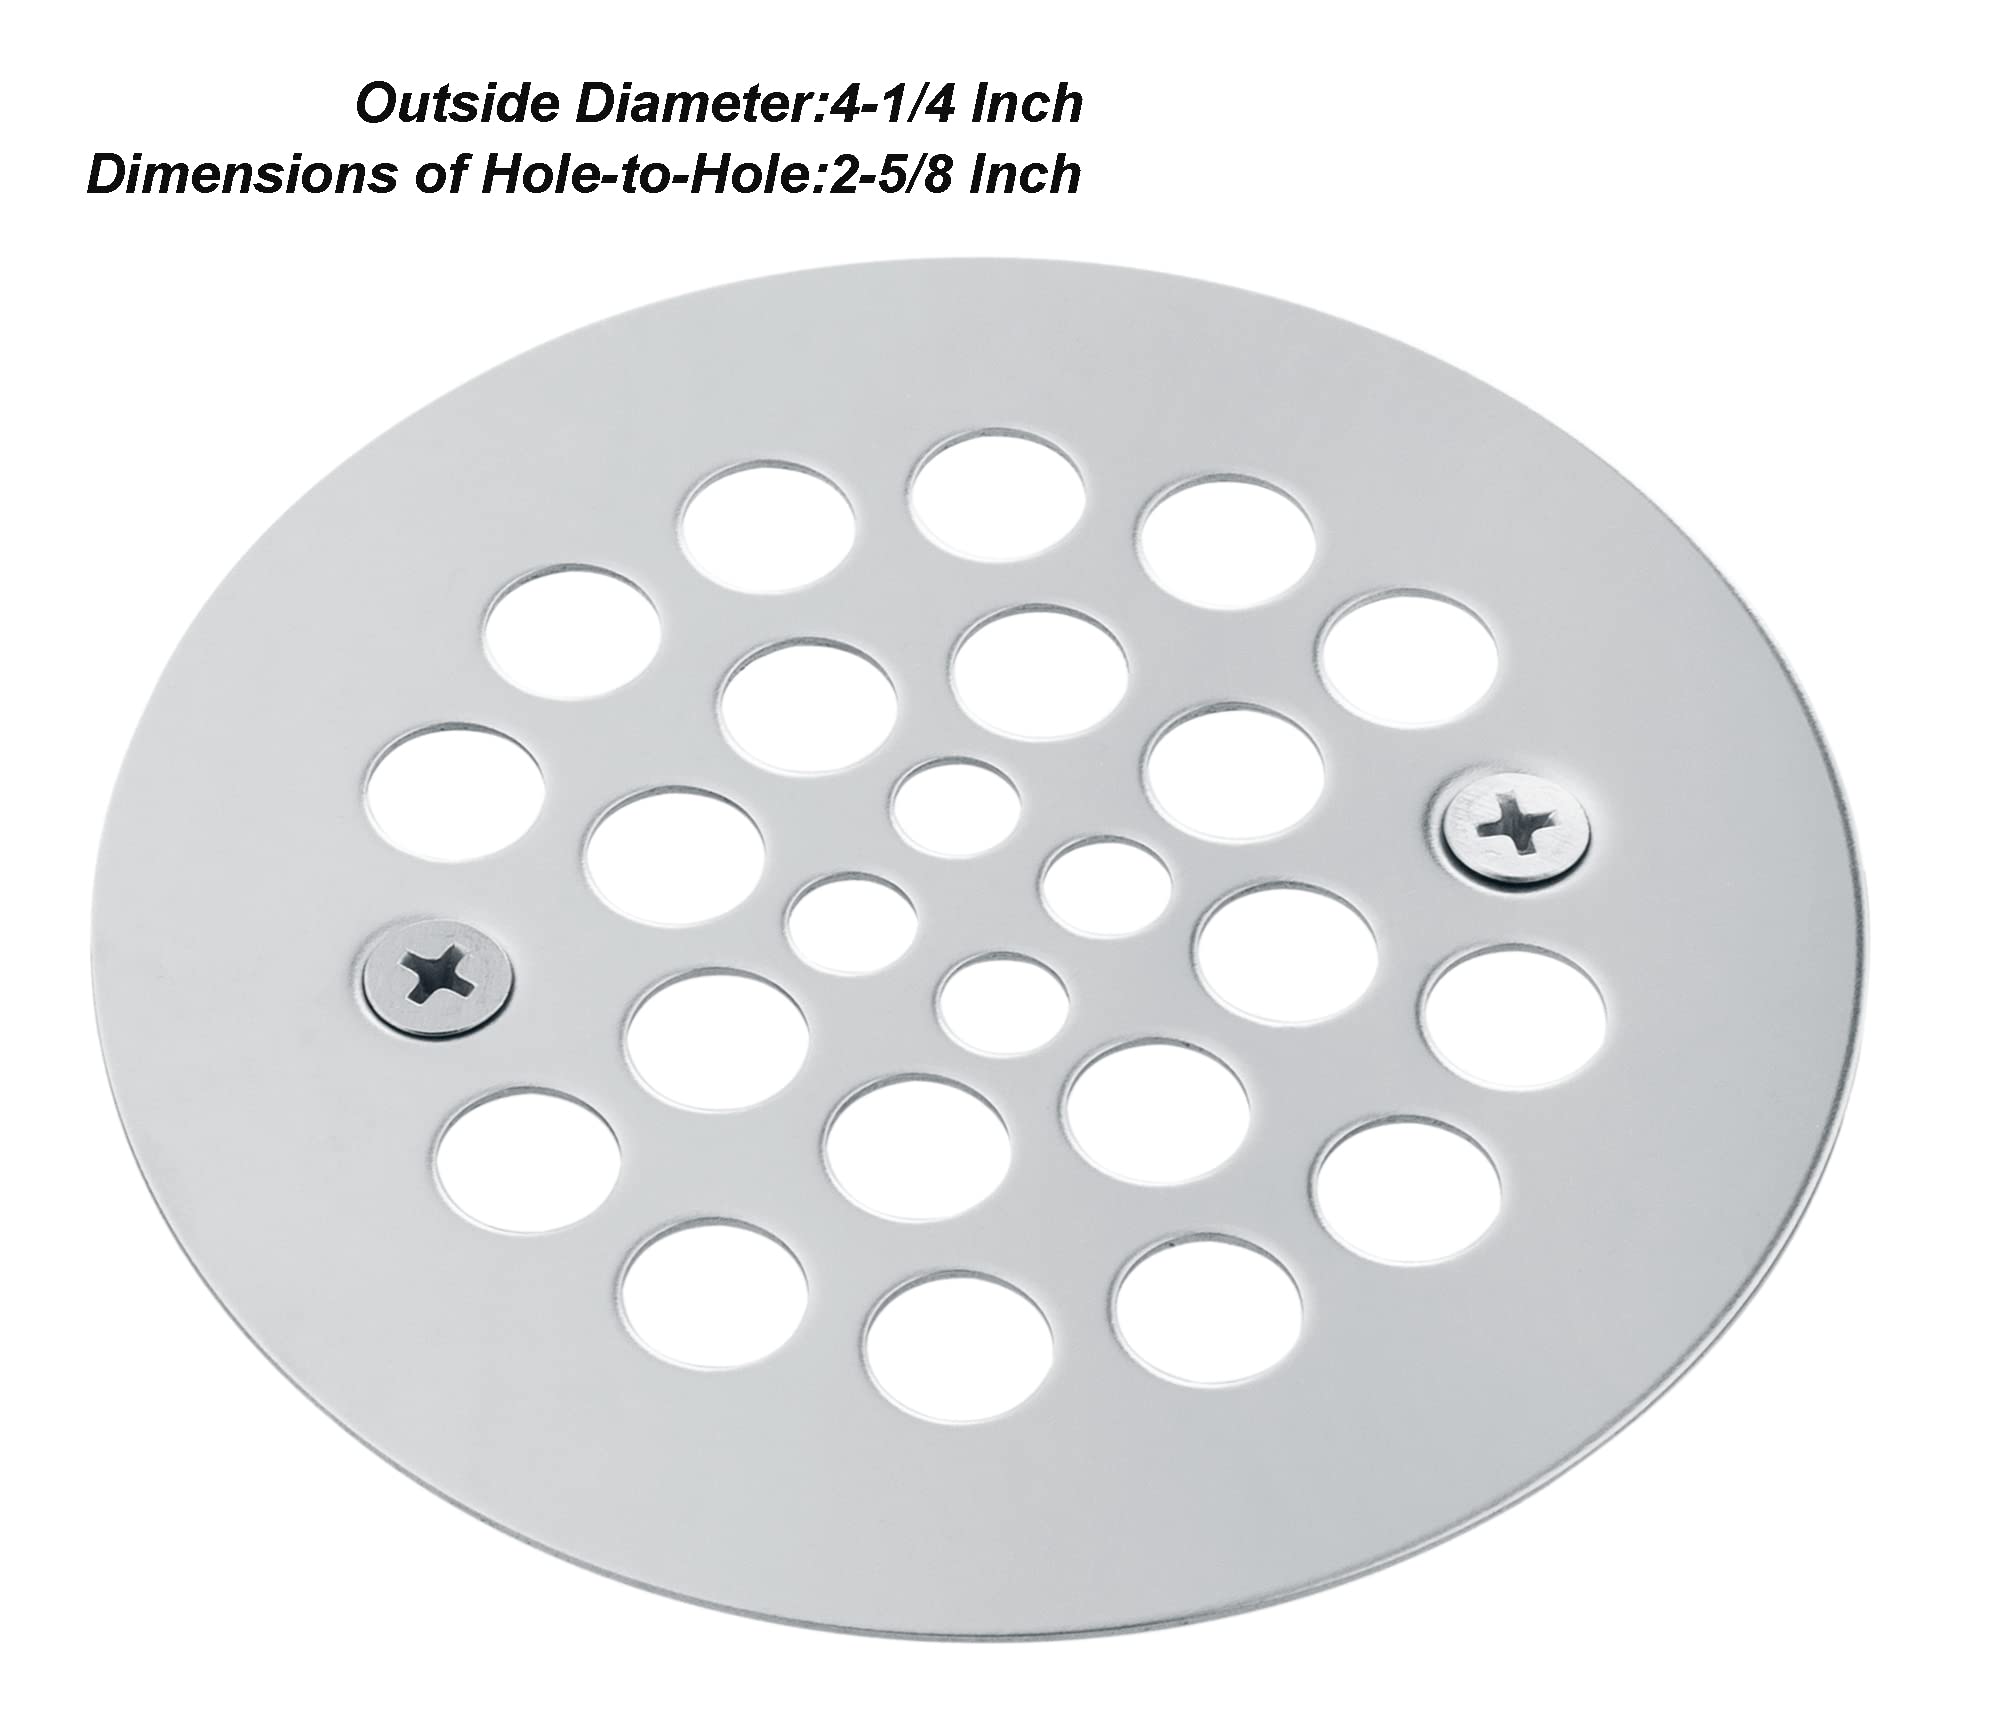 Artiwell 4-1/4“ Shower Strainer Drain Trim Set, Screw-in Shower Strainer Drain Cover, Plastic-Oddities Style Replacement Strainer Grid,Machine & Self-Tapping Screws Included (Chrome Plated)